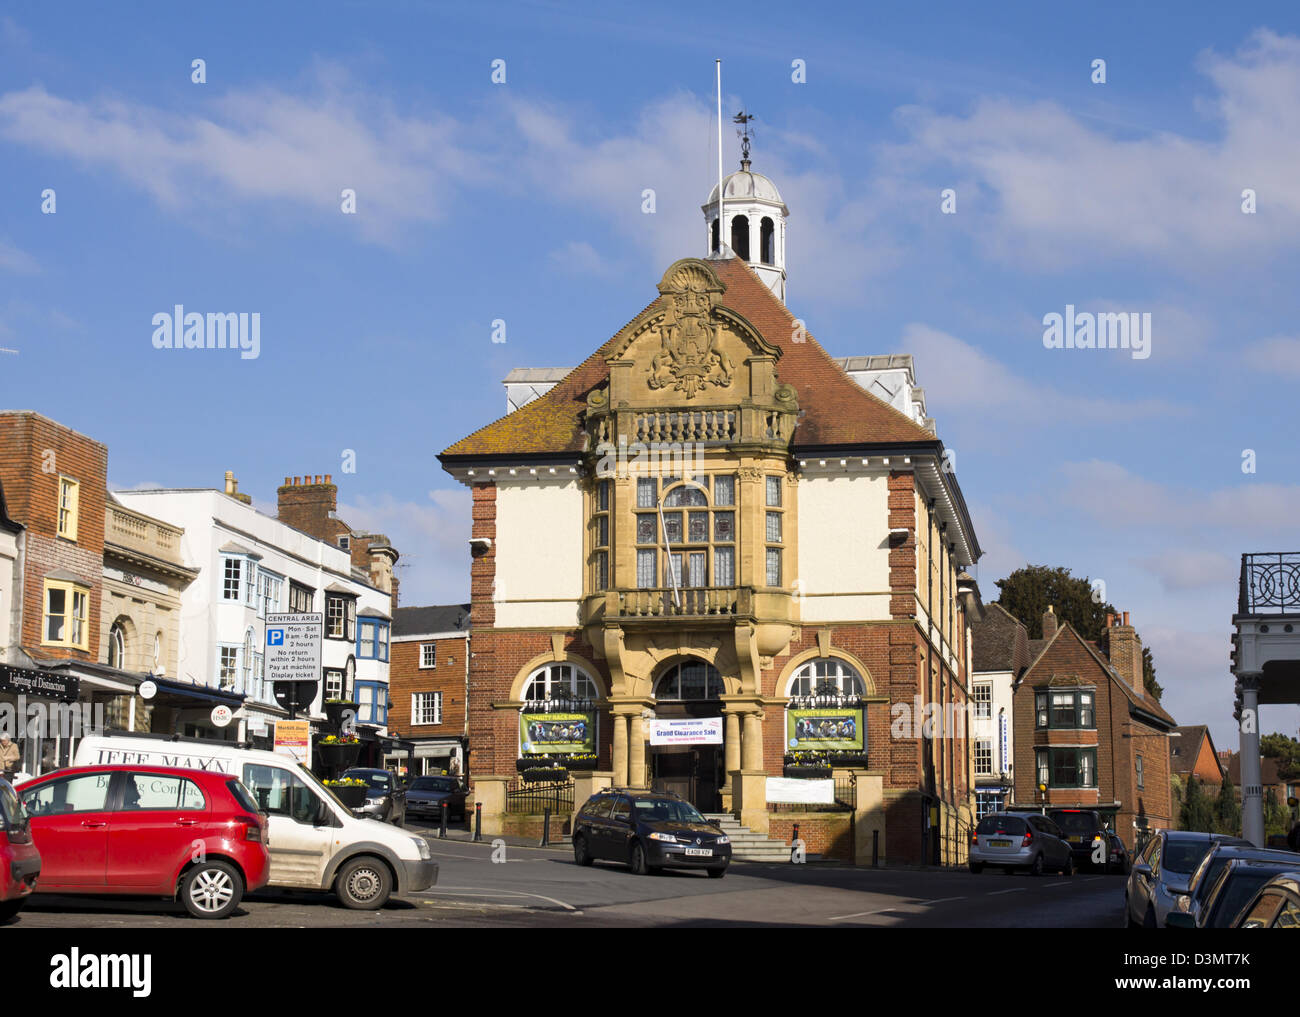 Marlborough is a small market town in the wiltshire countryside, England UK. Stock Photo